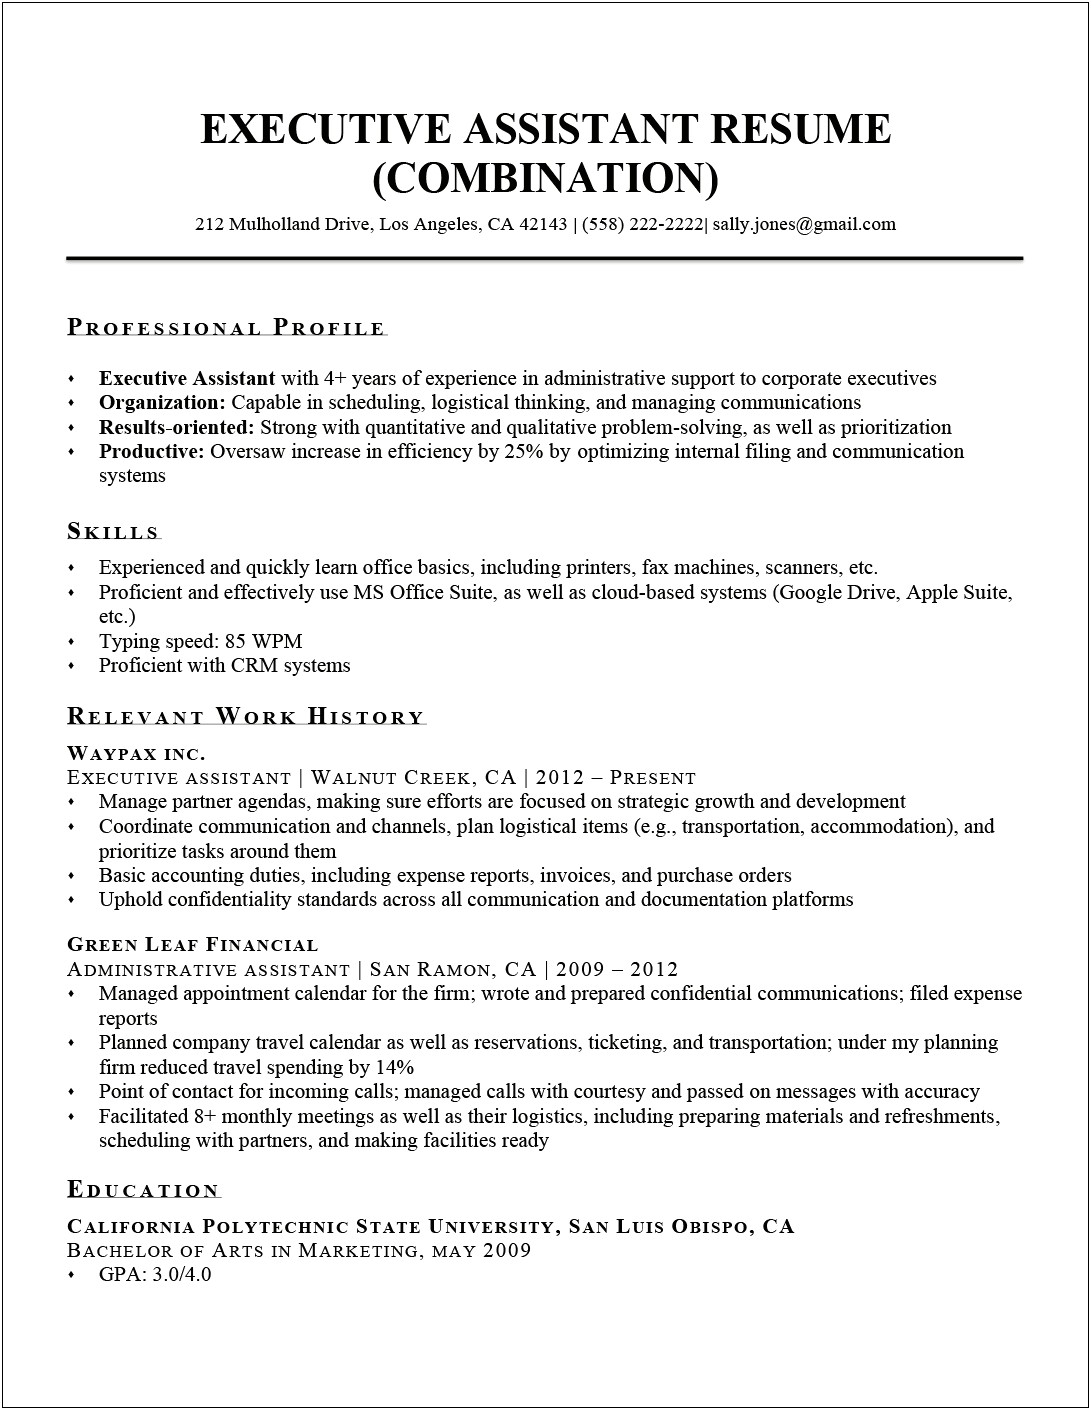 Executive Assistant Functional Resume Sample